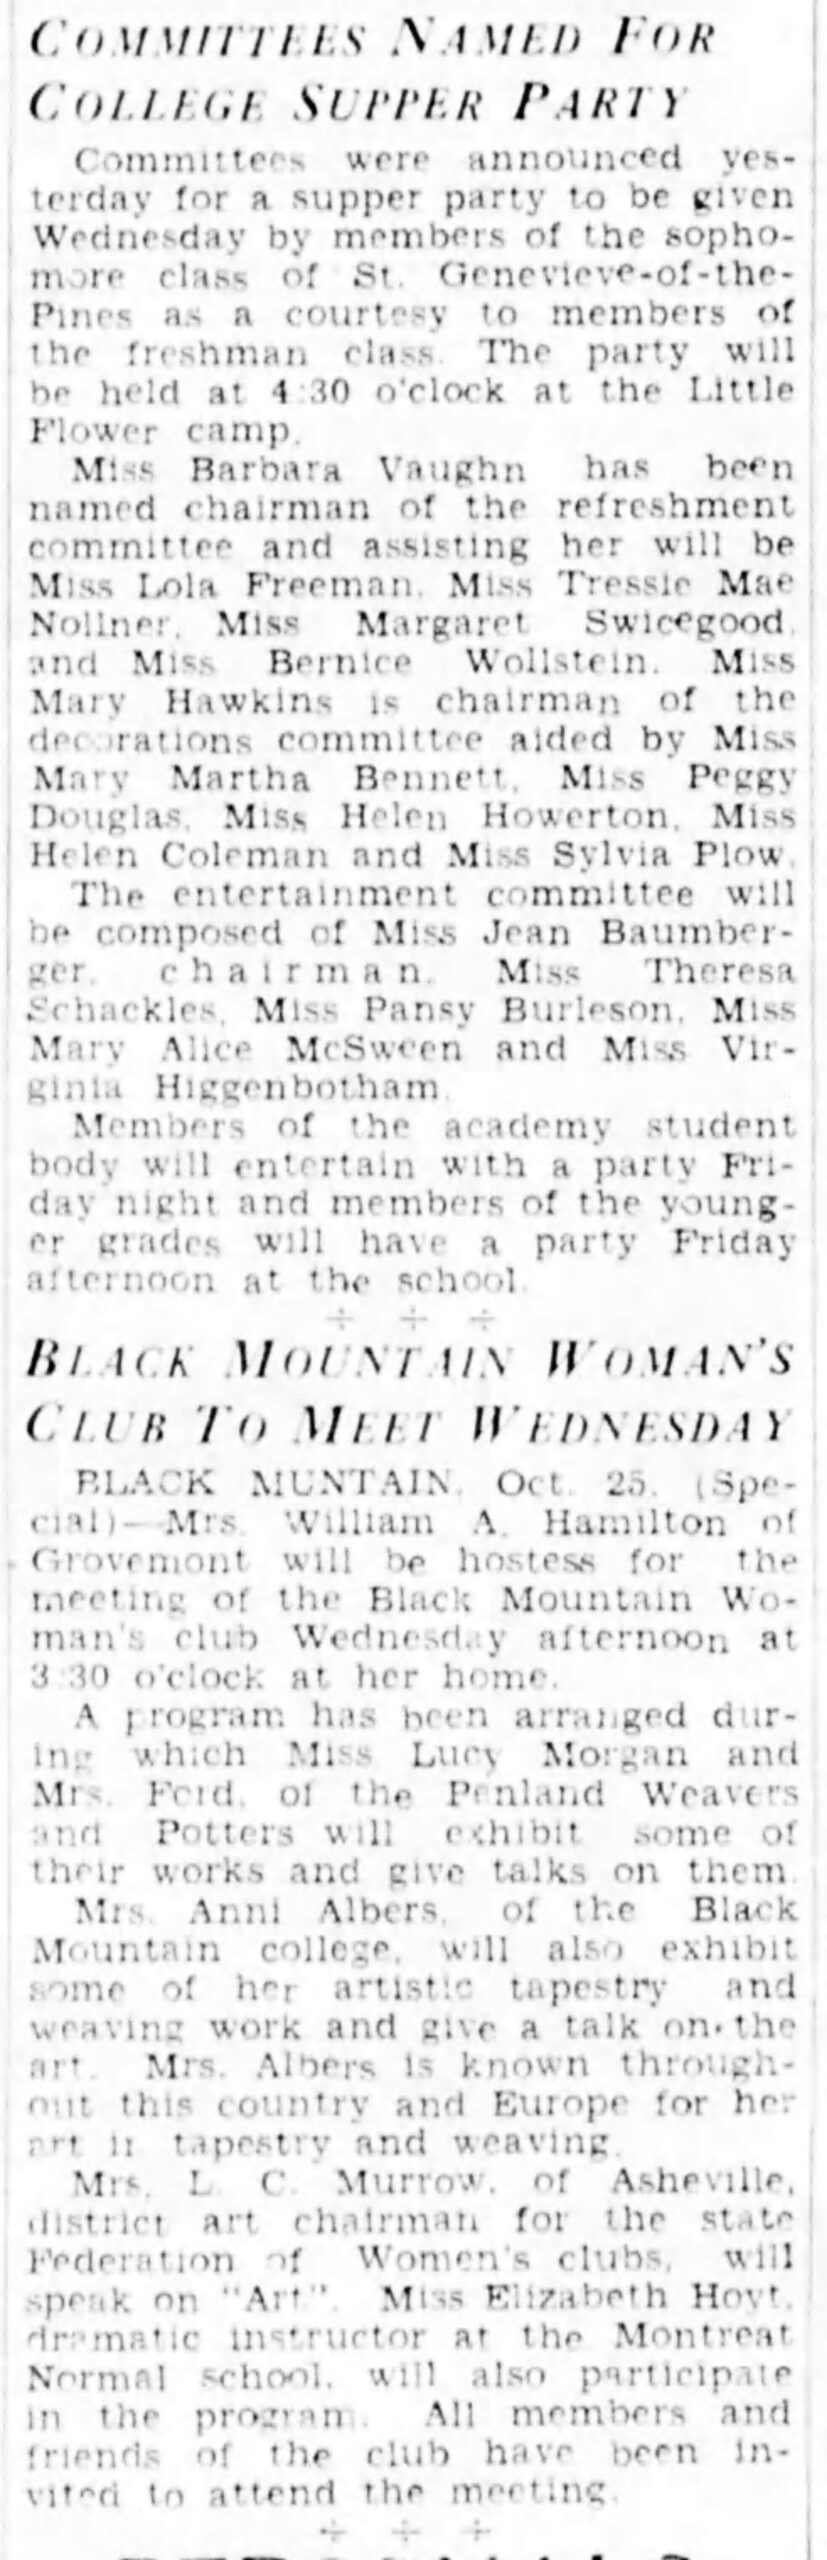 Asheville Citizen-Times, October 26, 1937, provided courtesy of the Swannanoa Valley Museum.